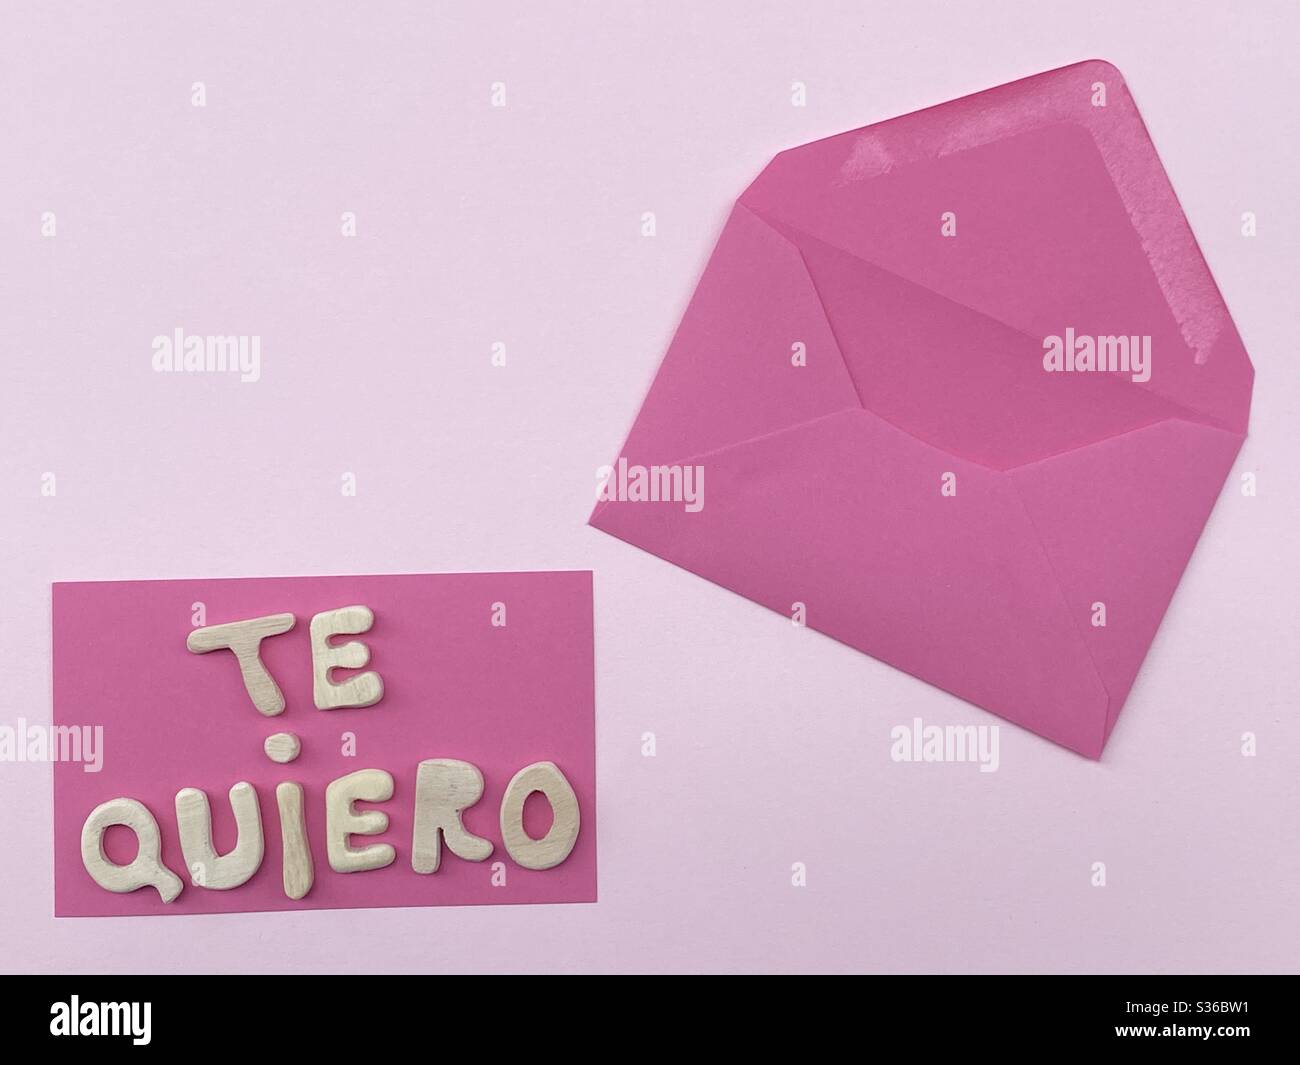 Te quiero, spanish text meaning I love you composed with handmade wooden letters over pink color Stock Photo